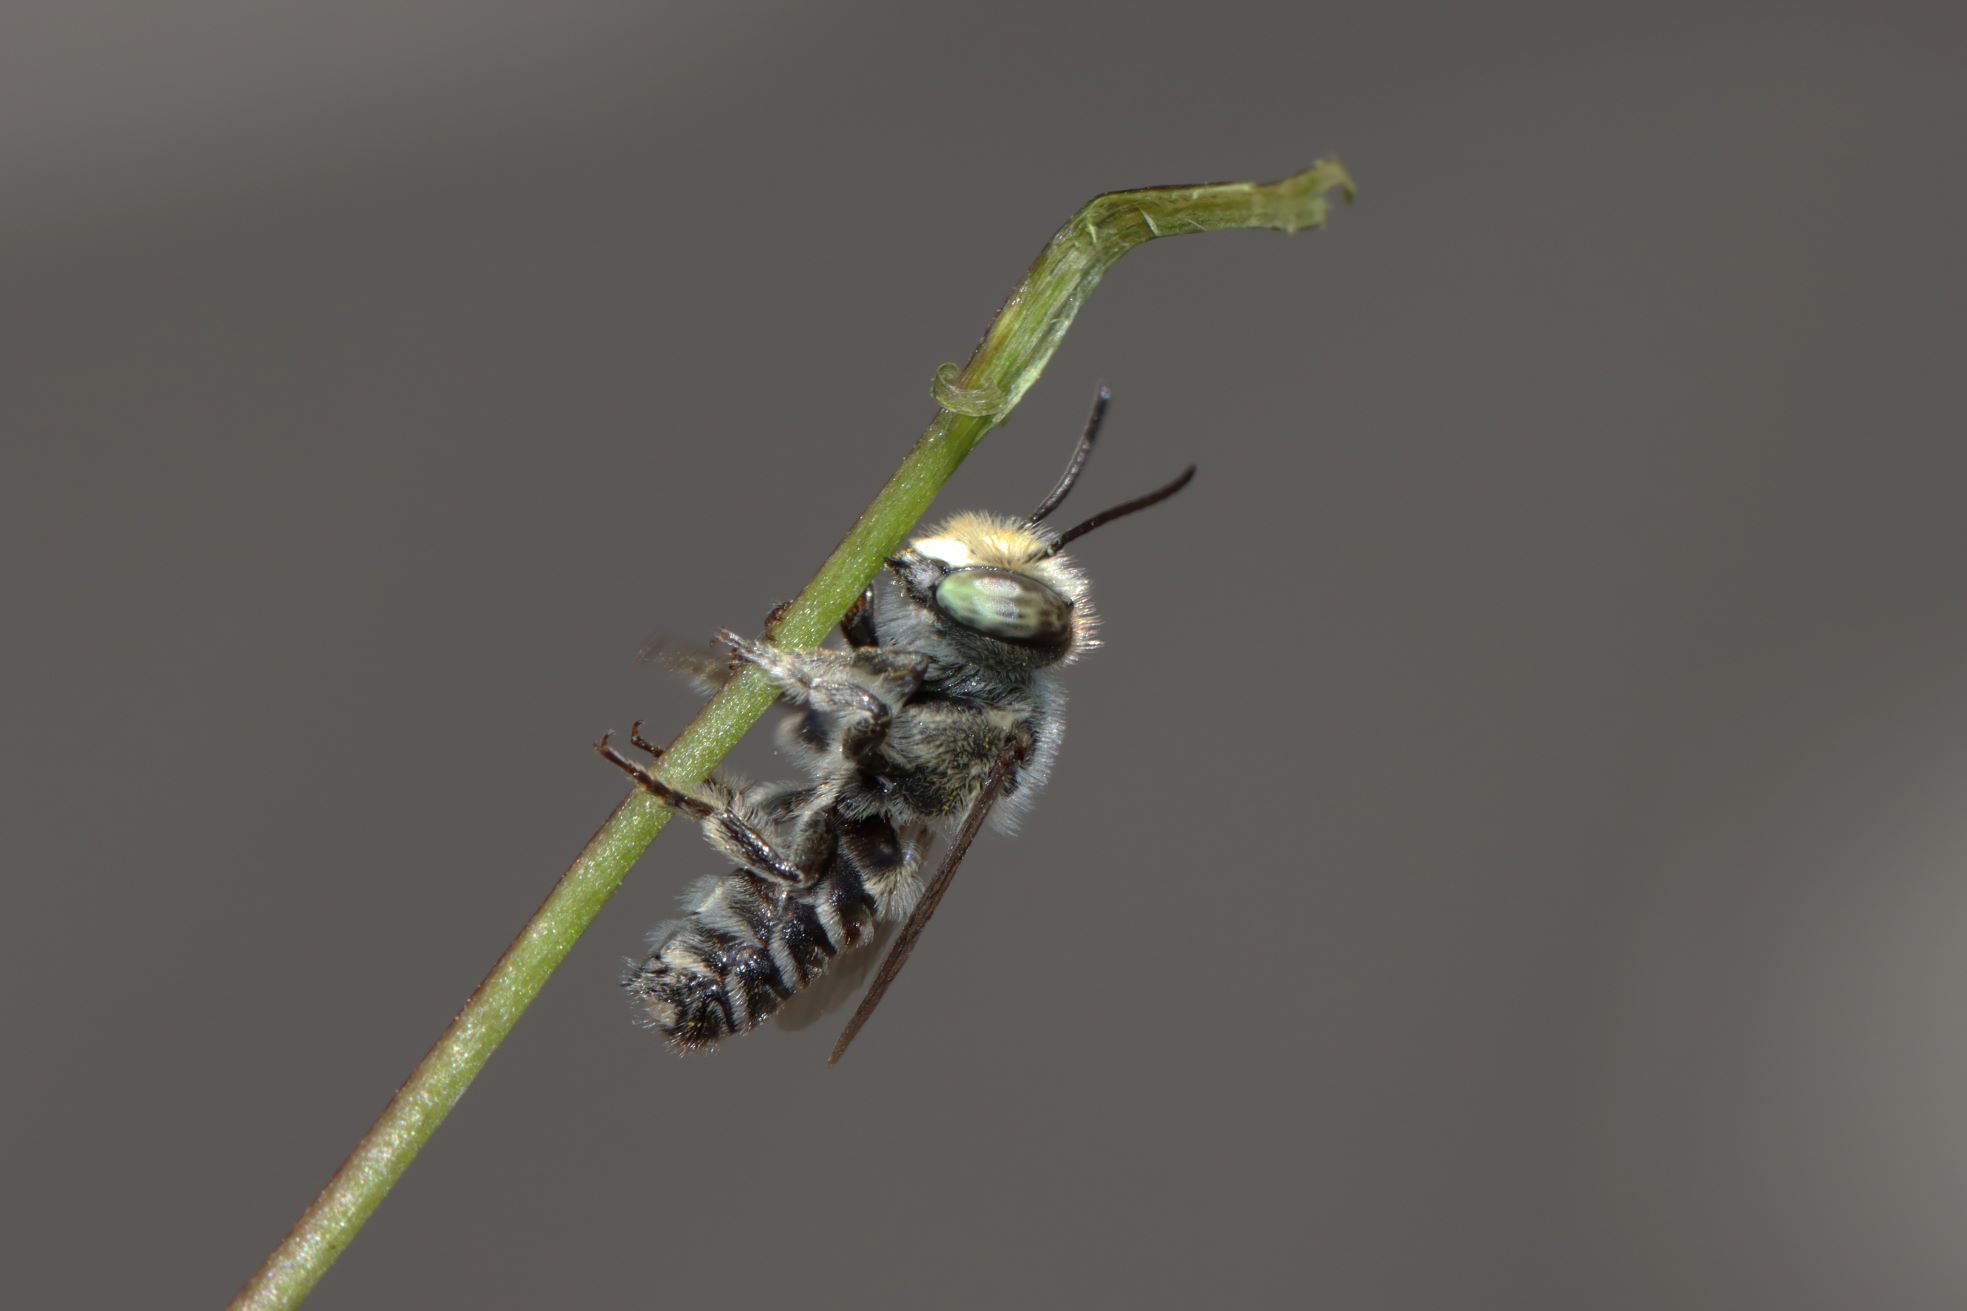 A native bee with green eyes and black-and-white stripes, clinging to a stalk of grass